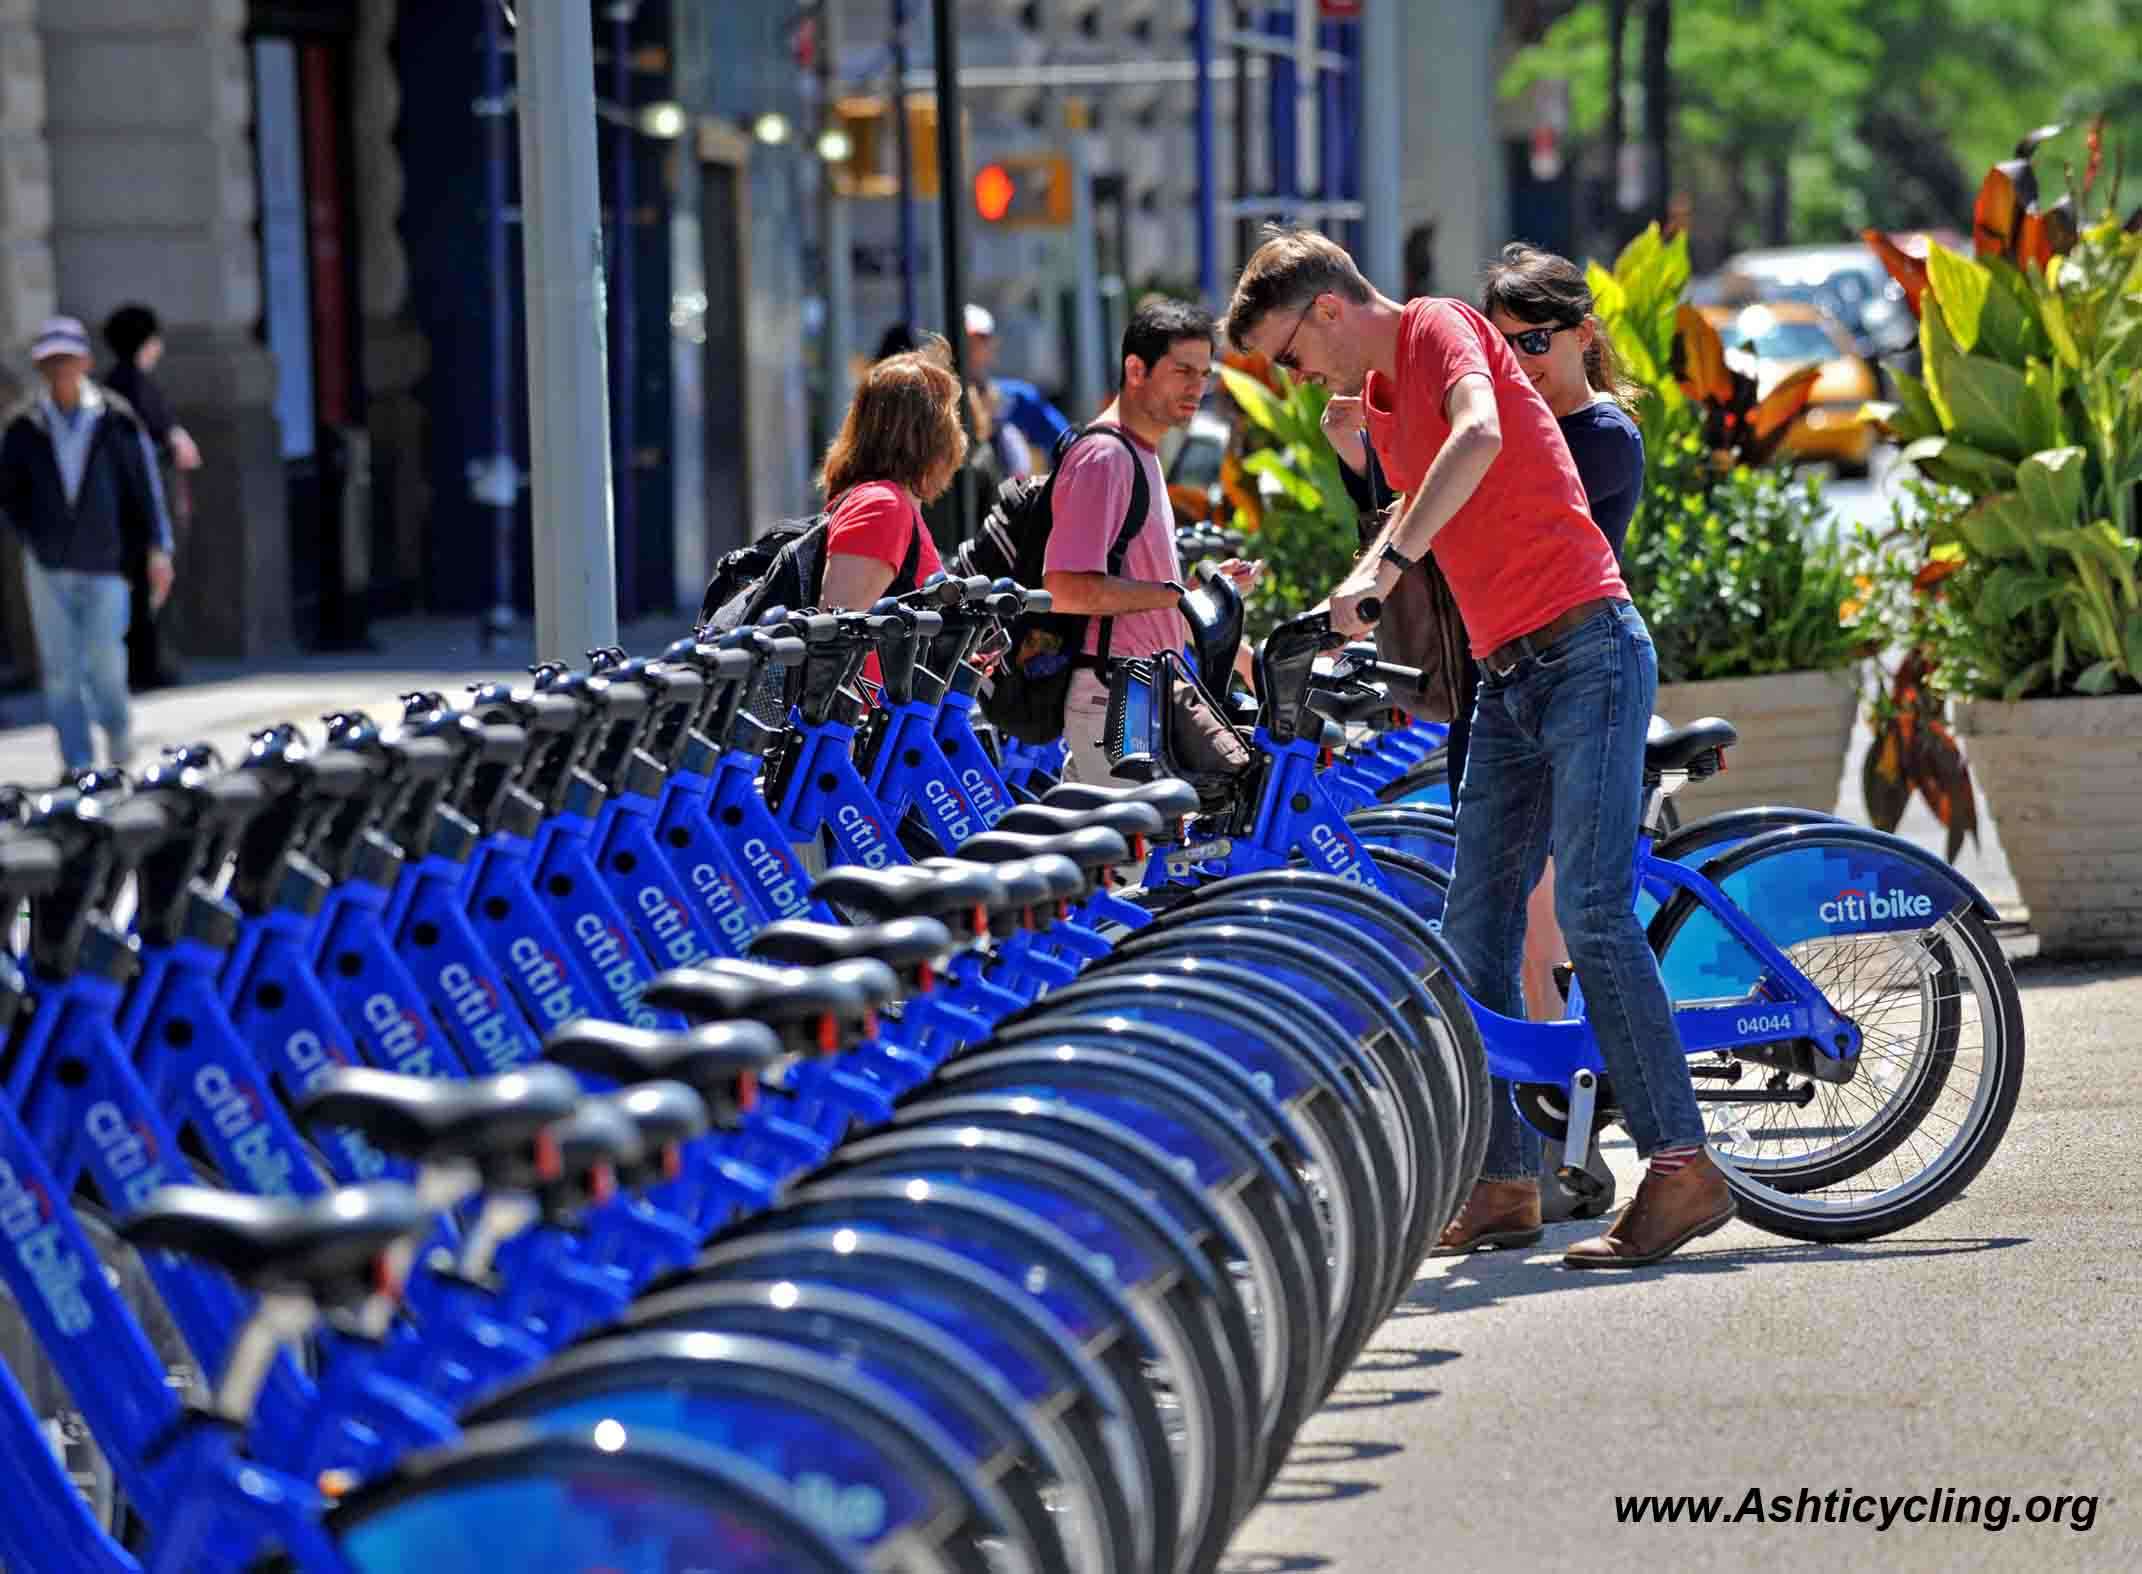 With AFP Story by Brigitte DUSSEAU: US-Transport-Bicycle-Share-CitiBike A couple get their Citi Bike bicycles from a station near Union Square as the bike sharing system is launched May 27, 2013 in New York. About 330 stations in Manhattan and Brooklyn will have thousands of bicycles for rent. AFP PHOTO/Stan HONDA (Photo credit should read STAN HONDA/AFP/Getty Images)